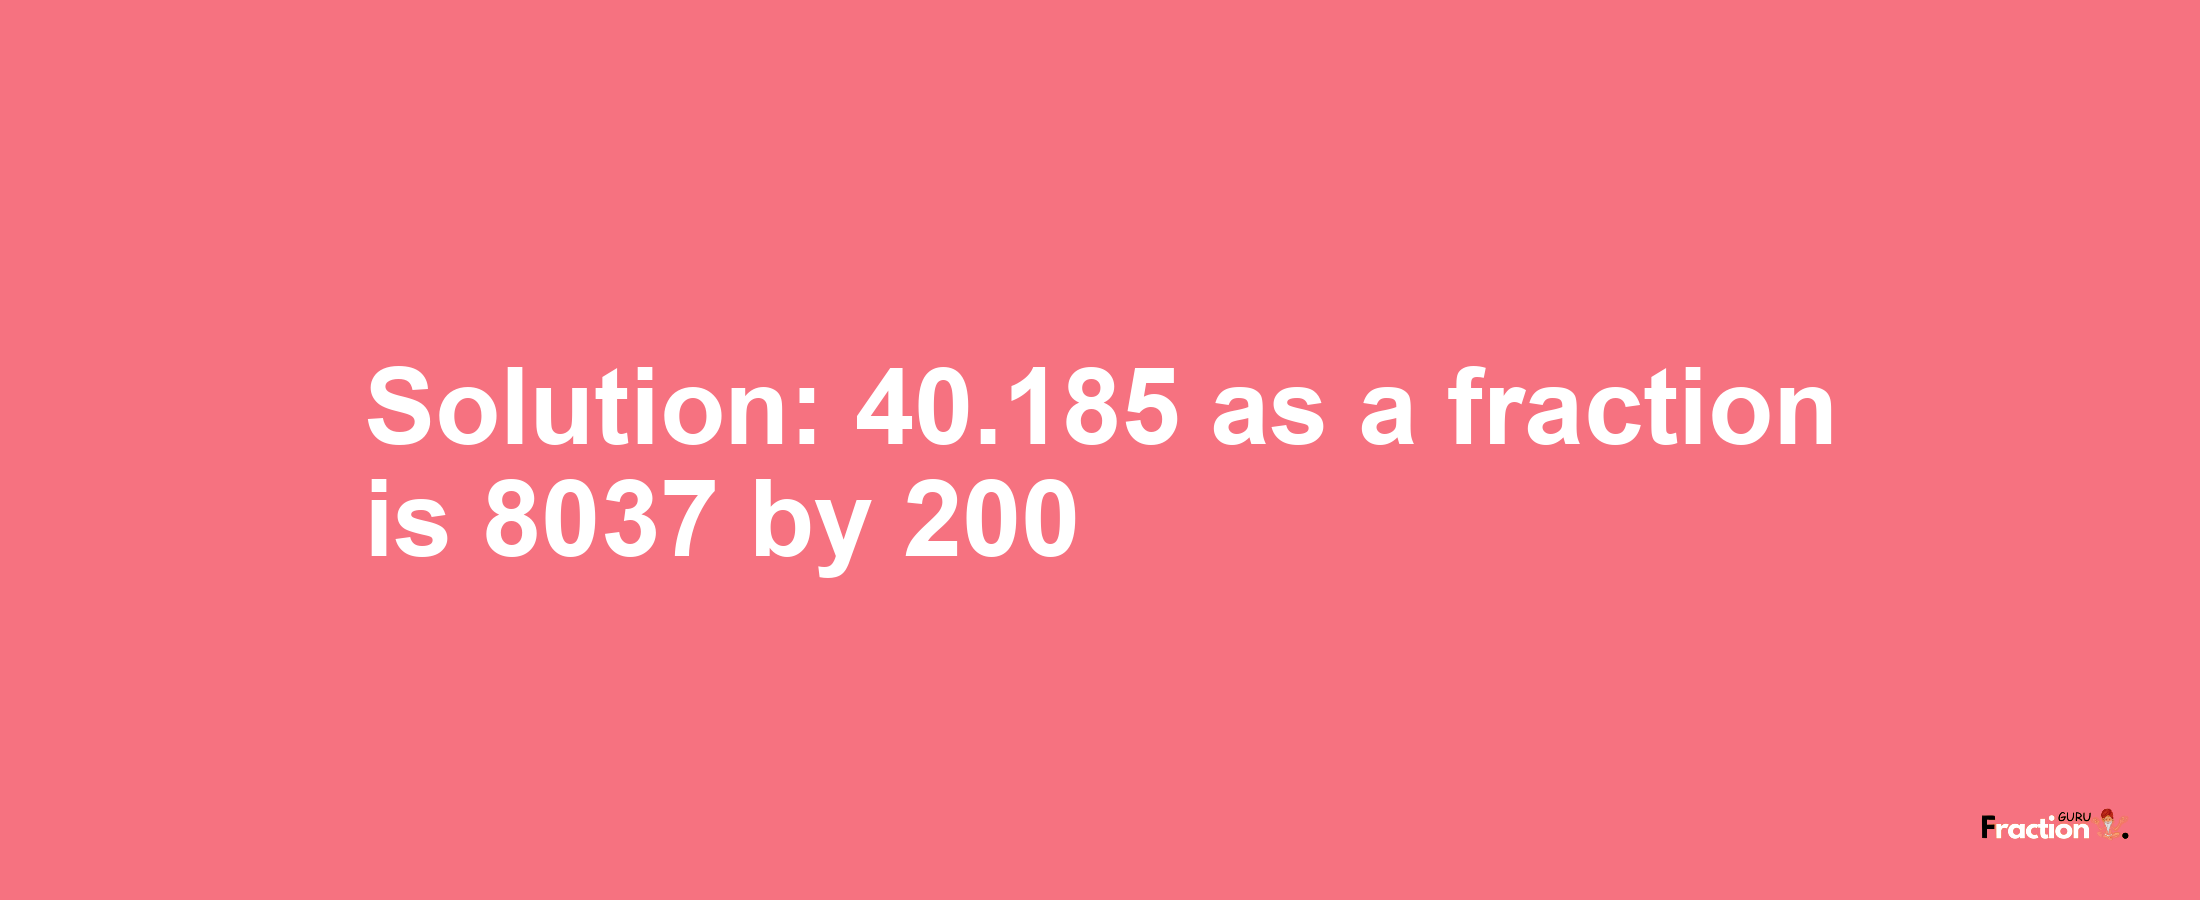 Solution:40.185 as a fraction is 8037/200